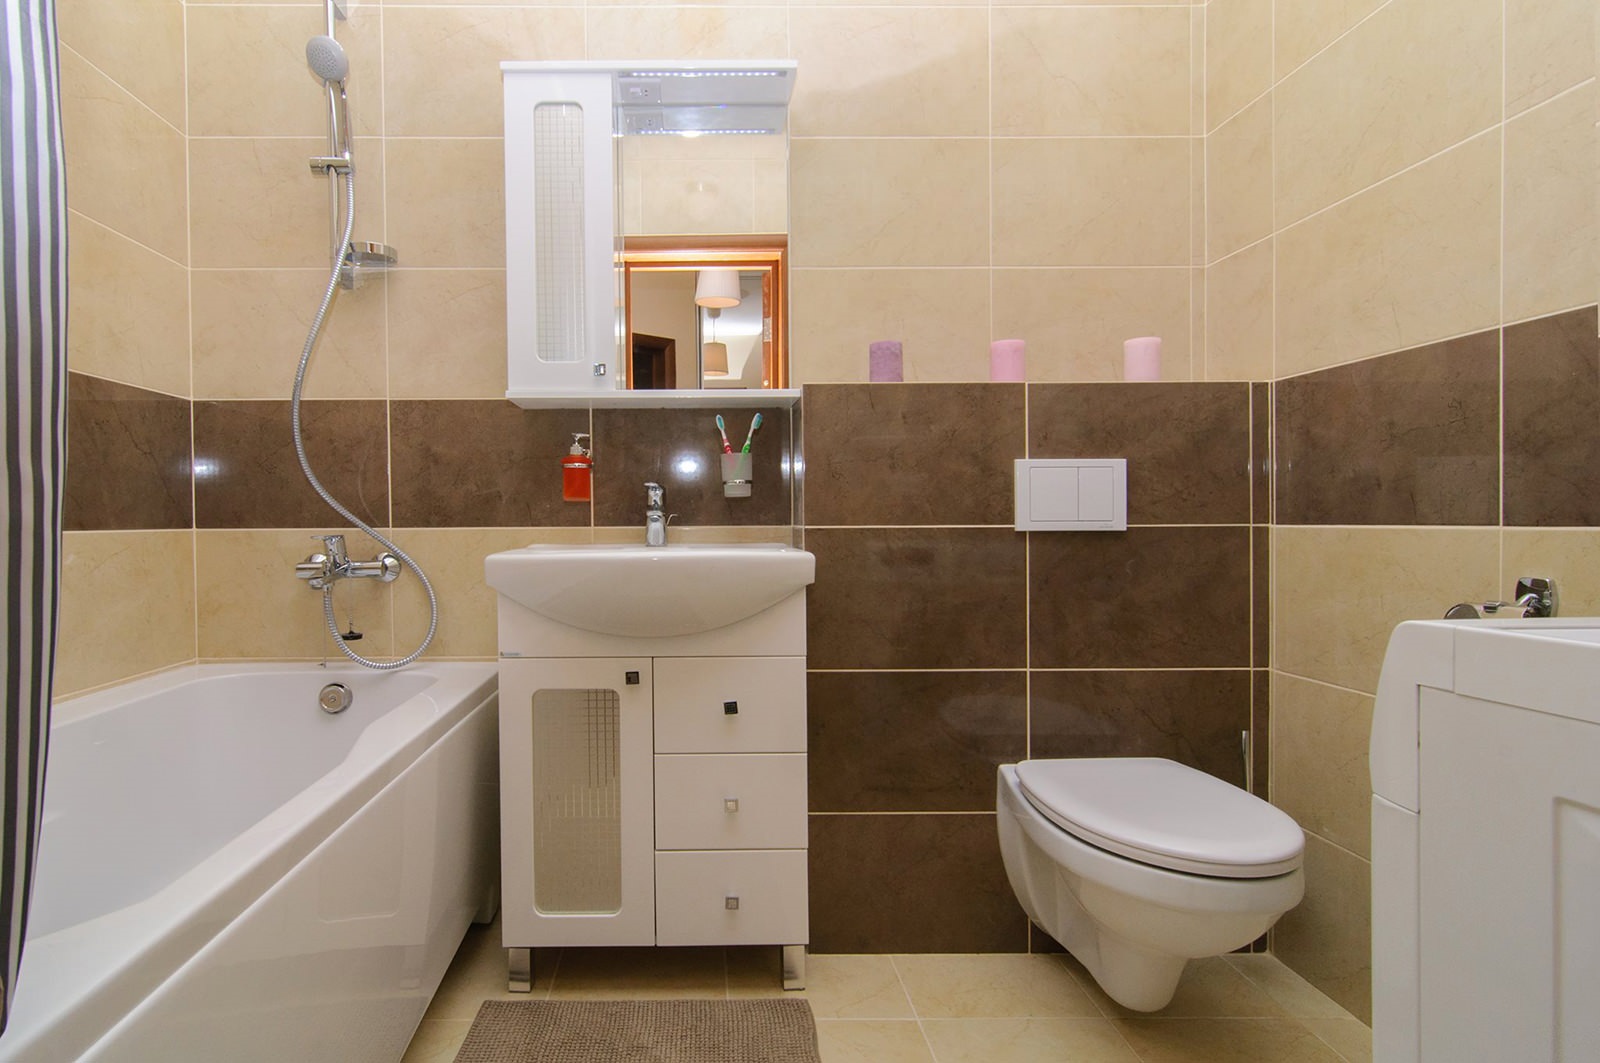 An example of a light bathroom interior in beige color